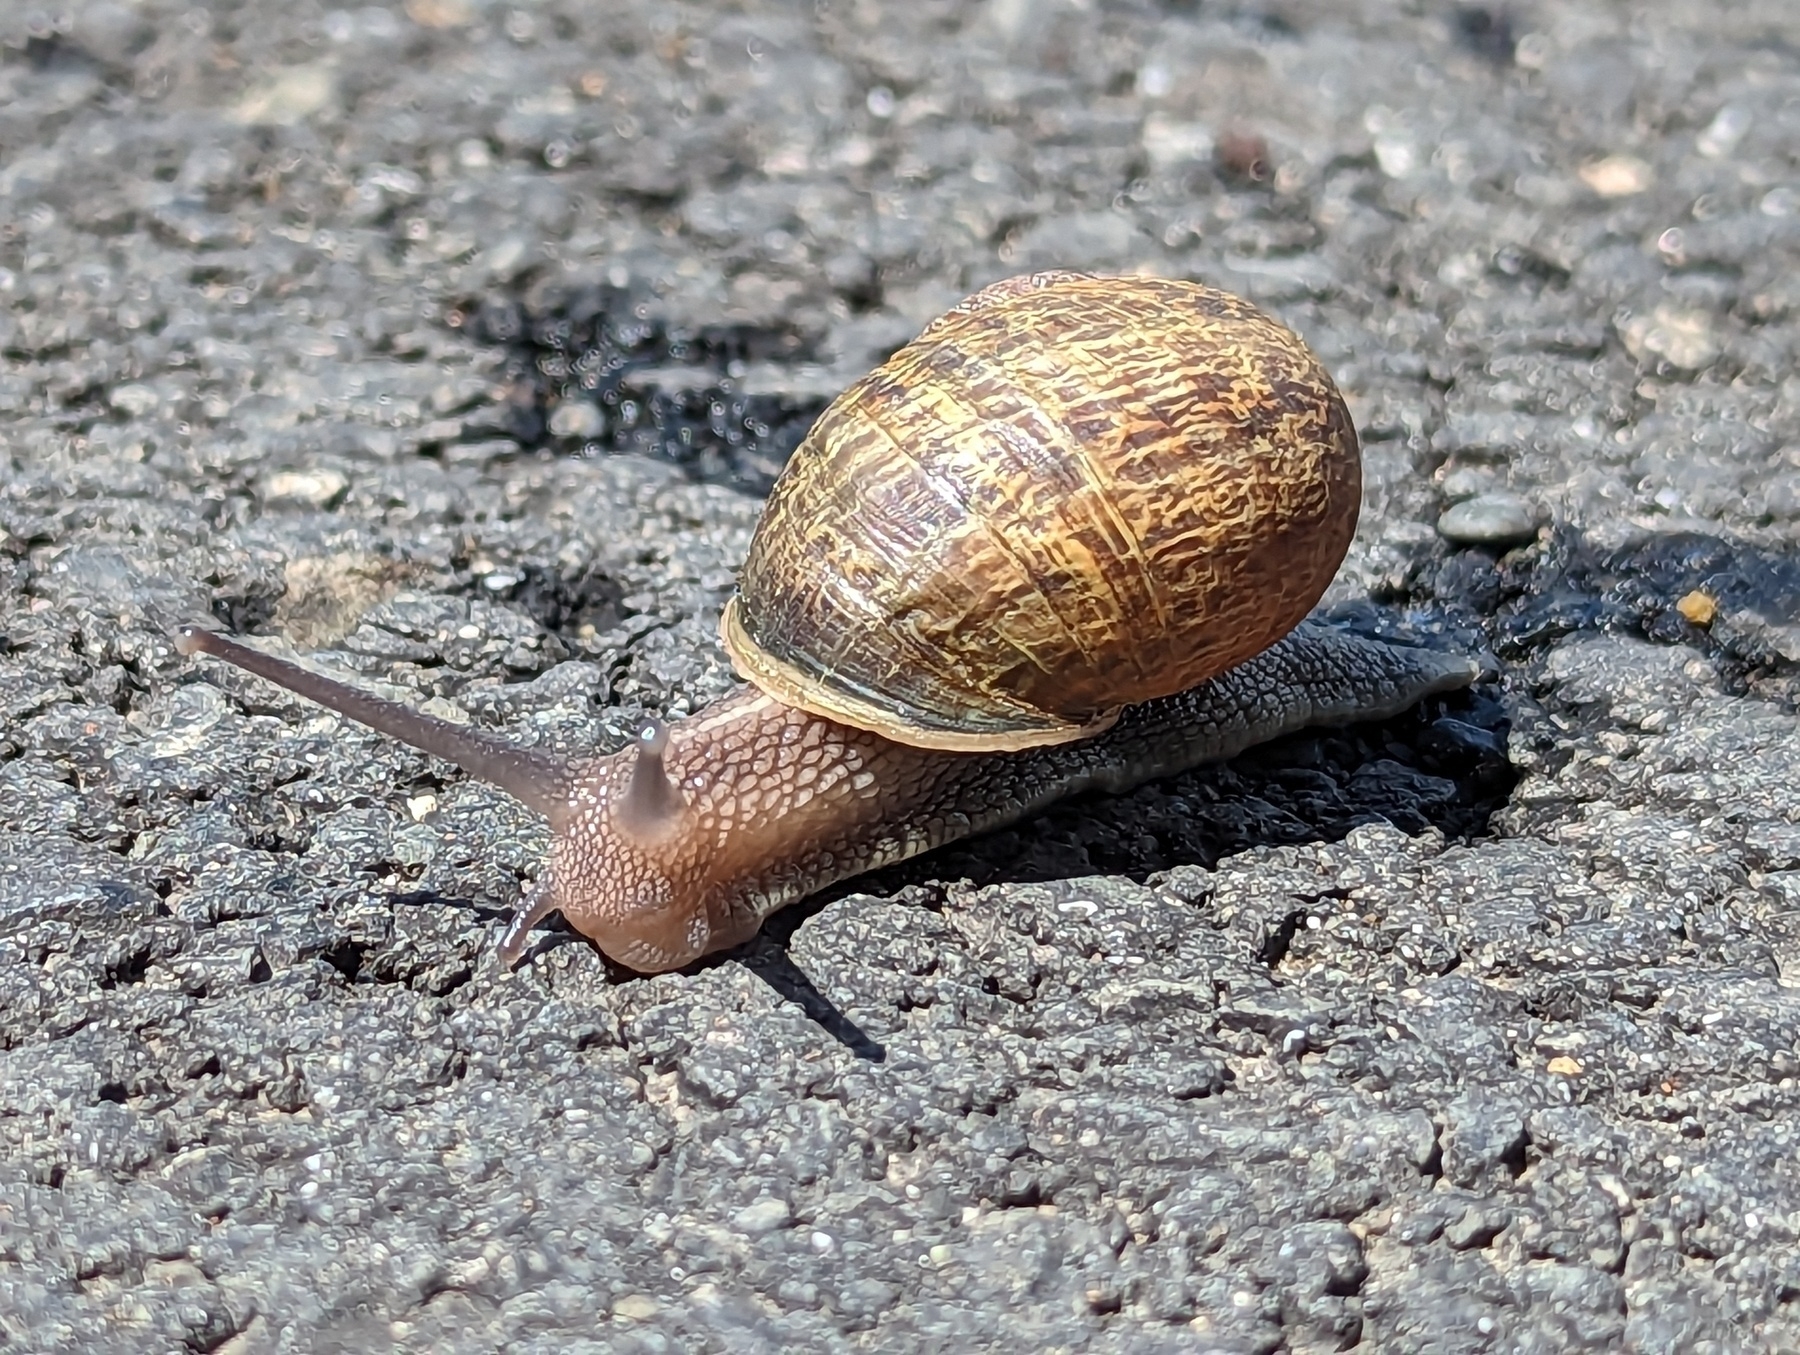 A close up image of a common snail glides over gray warm sunlit tarmac, its large brown striated patterned shell perched jauntily atop its pinkish body, leaves a wet trail behind it Monday, May 8, 2023 as it crosses the Wildcat Creek Greenway in San Pablo, California.